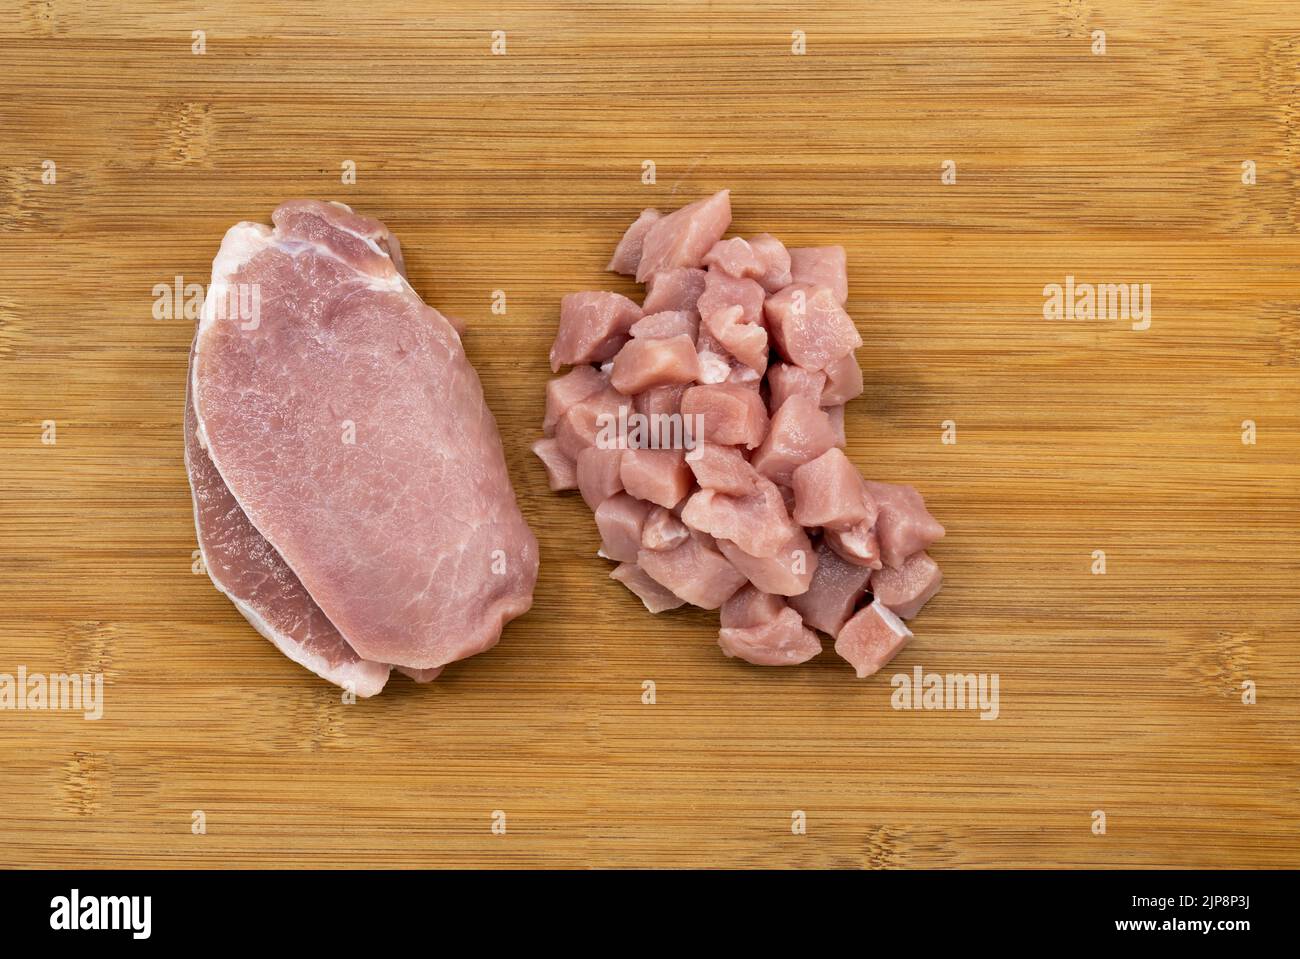 Top view fresh pork fillet and pile of cube cut pork on bamboo wooden board. Two different styles of the cut of fresh pork meat. Stock Photo